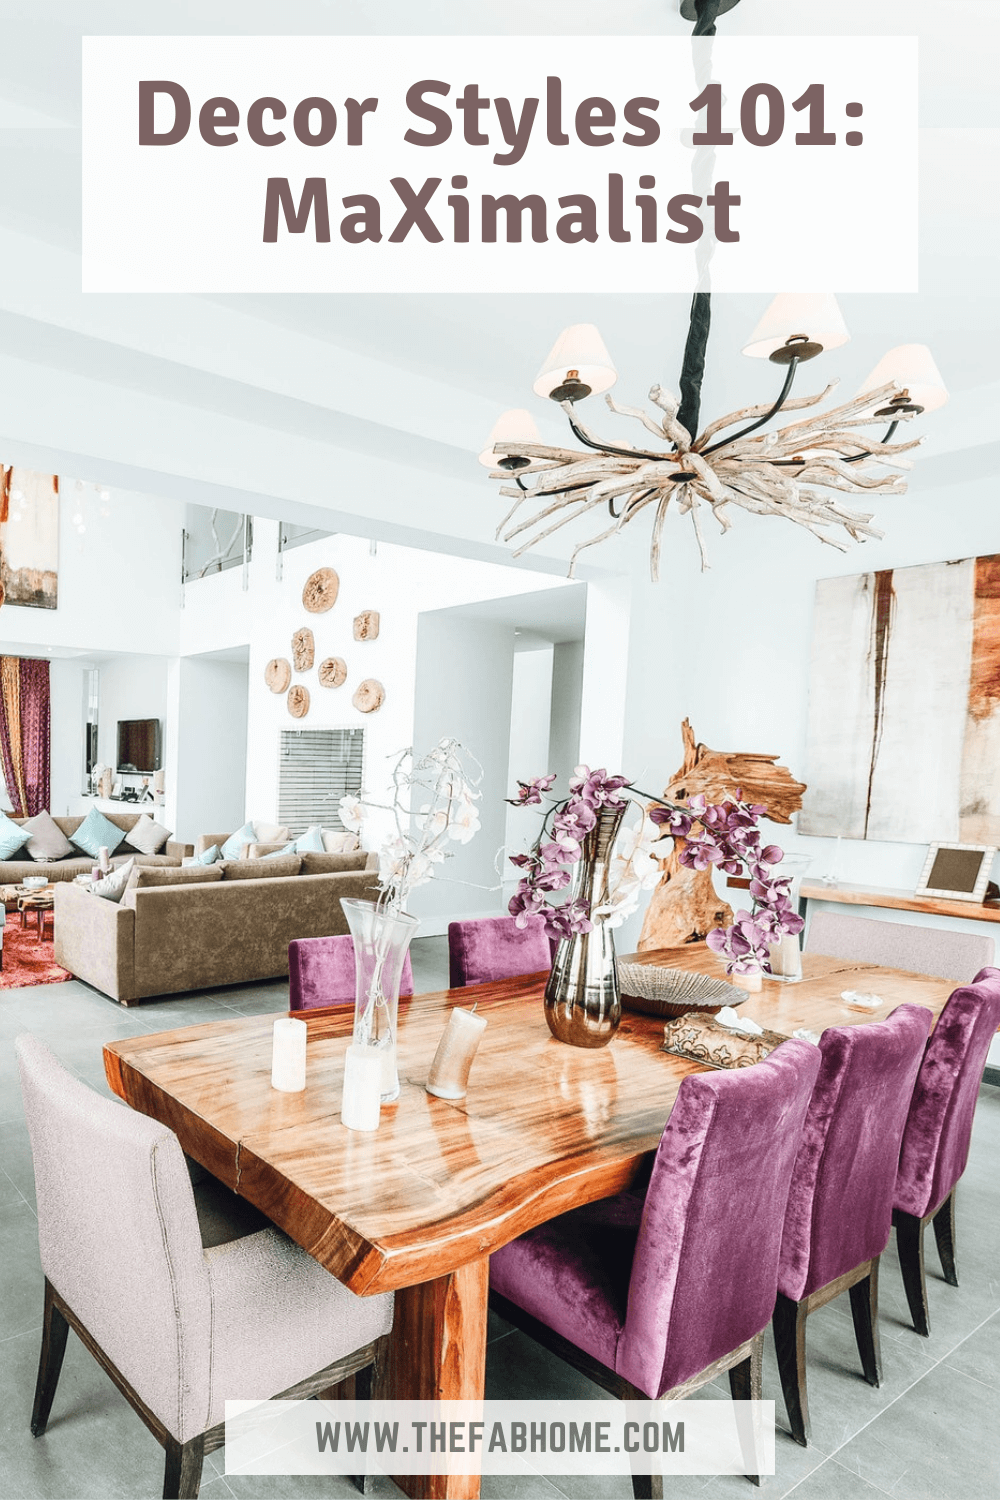 If you love everything to be a little 'extra', there's a decor style just for you - Maximalist! This style says that 'more is more', so you can go all out!